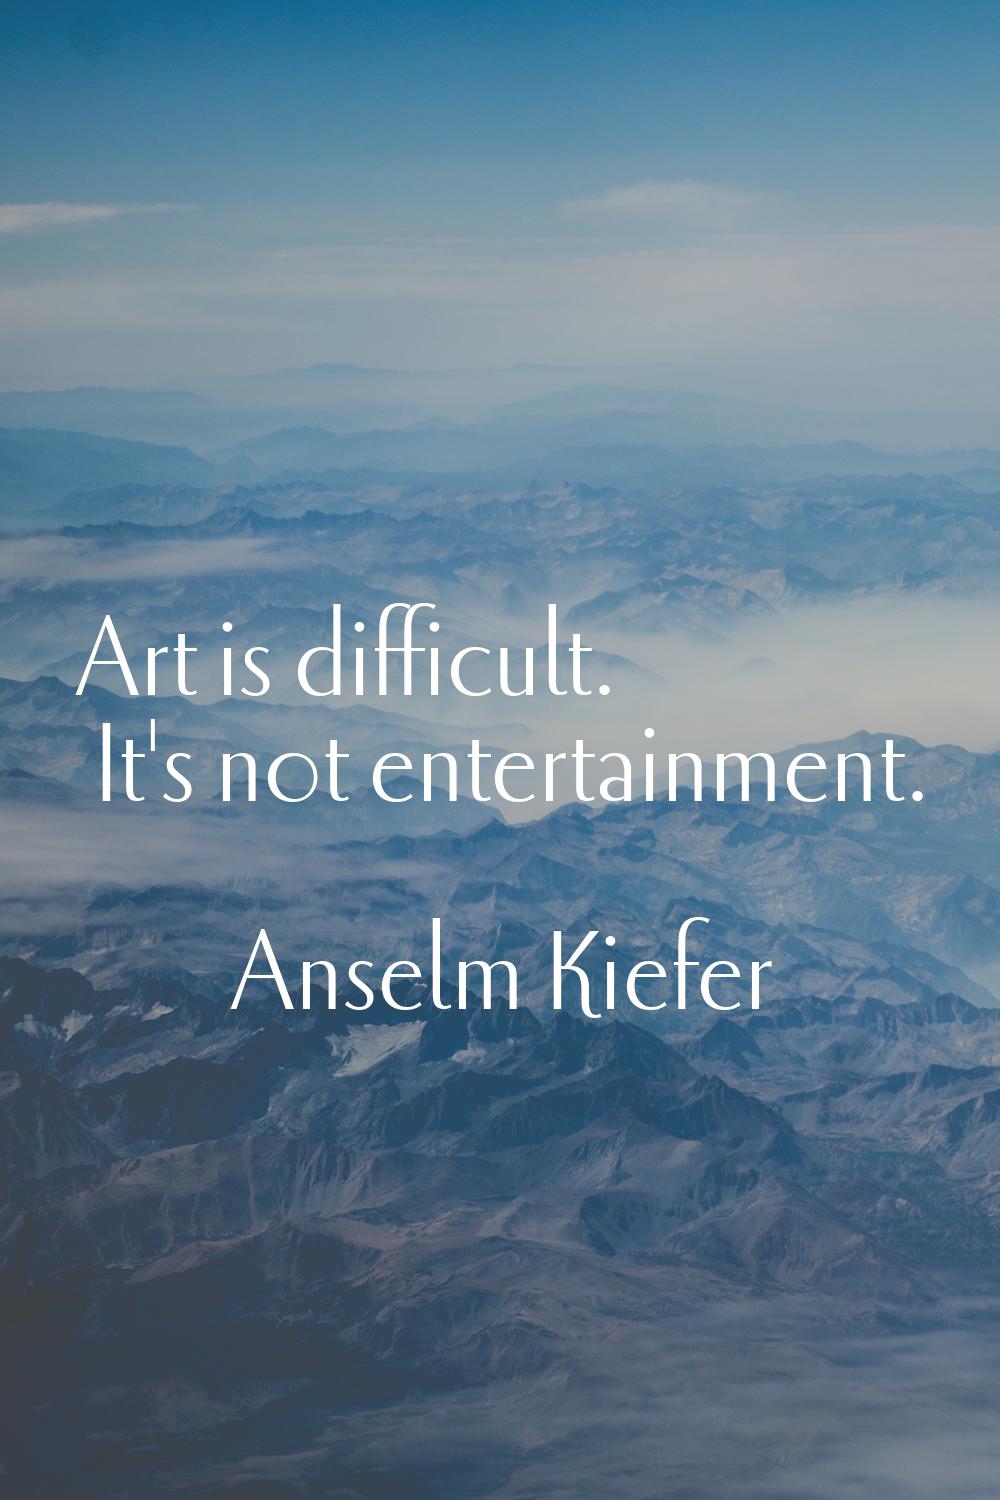 Art is difficult. It's not entertainment.